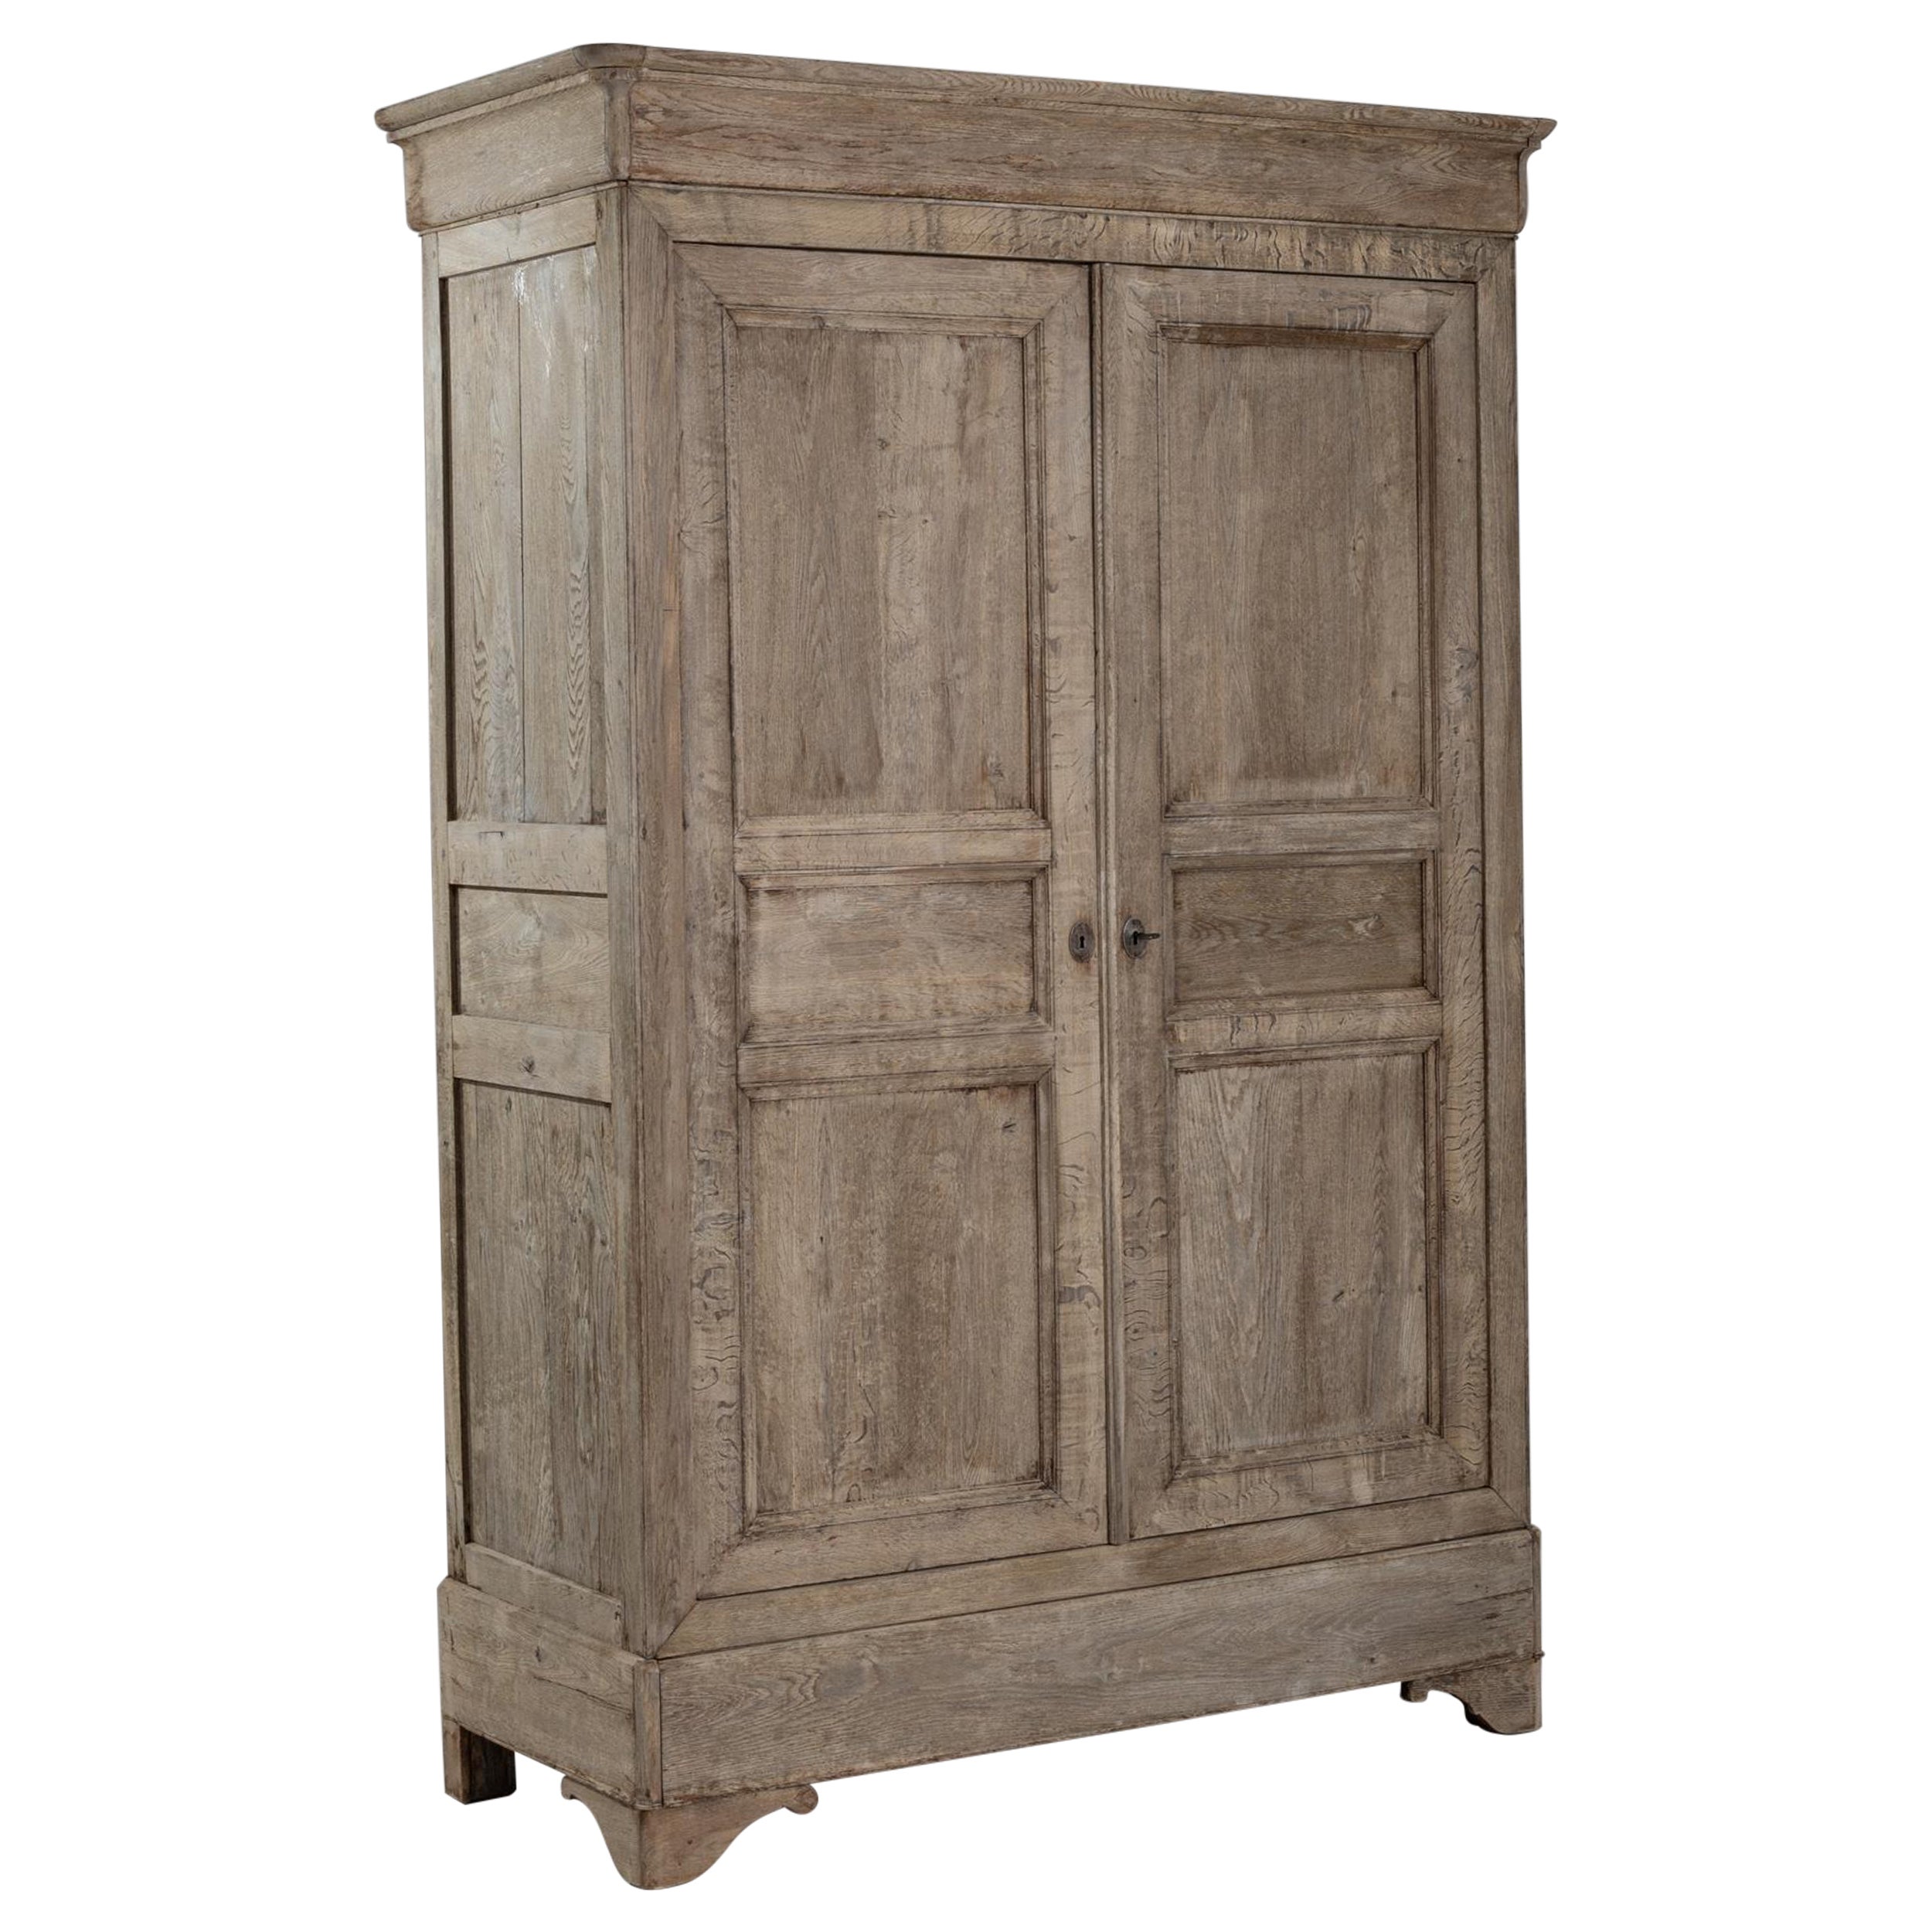 1880s French Bleached Oak Armoire